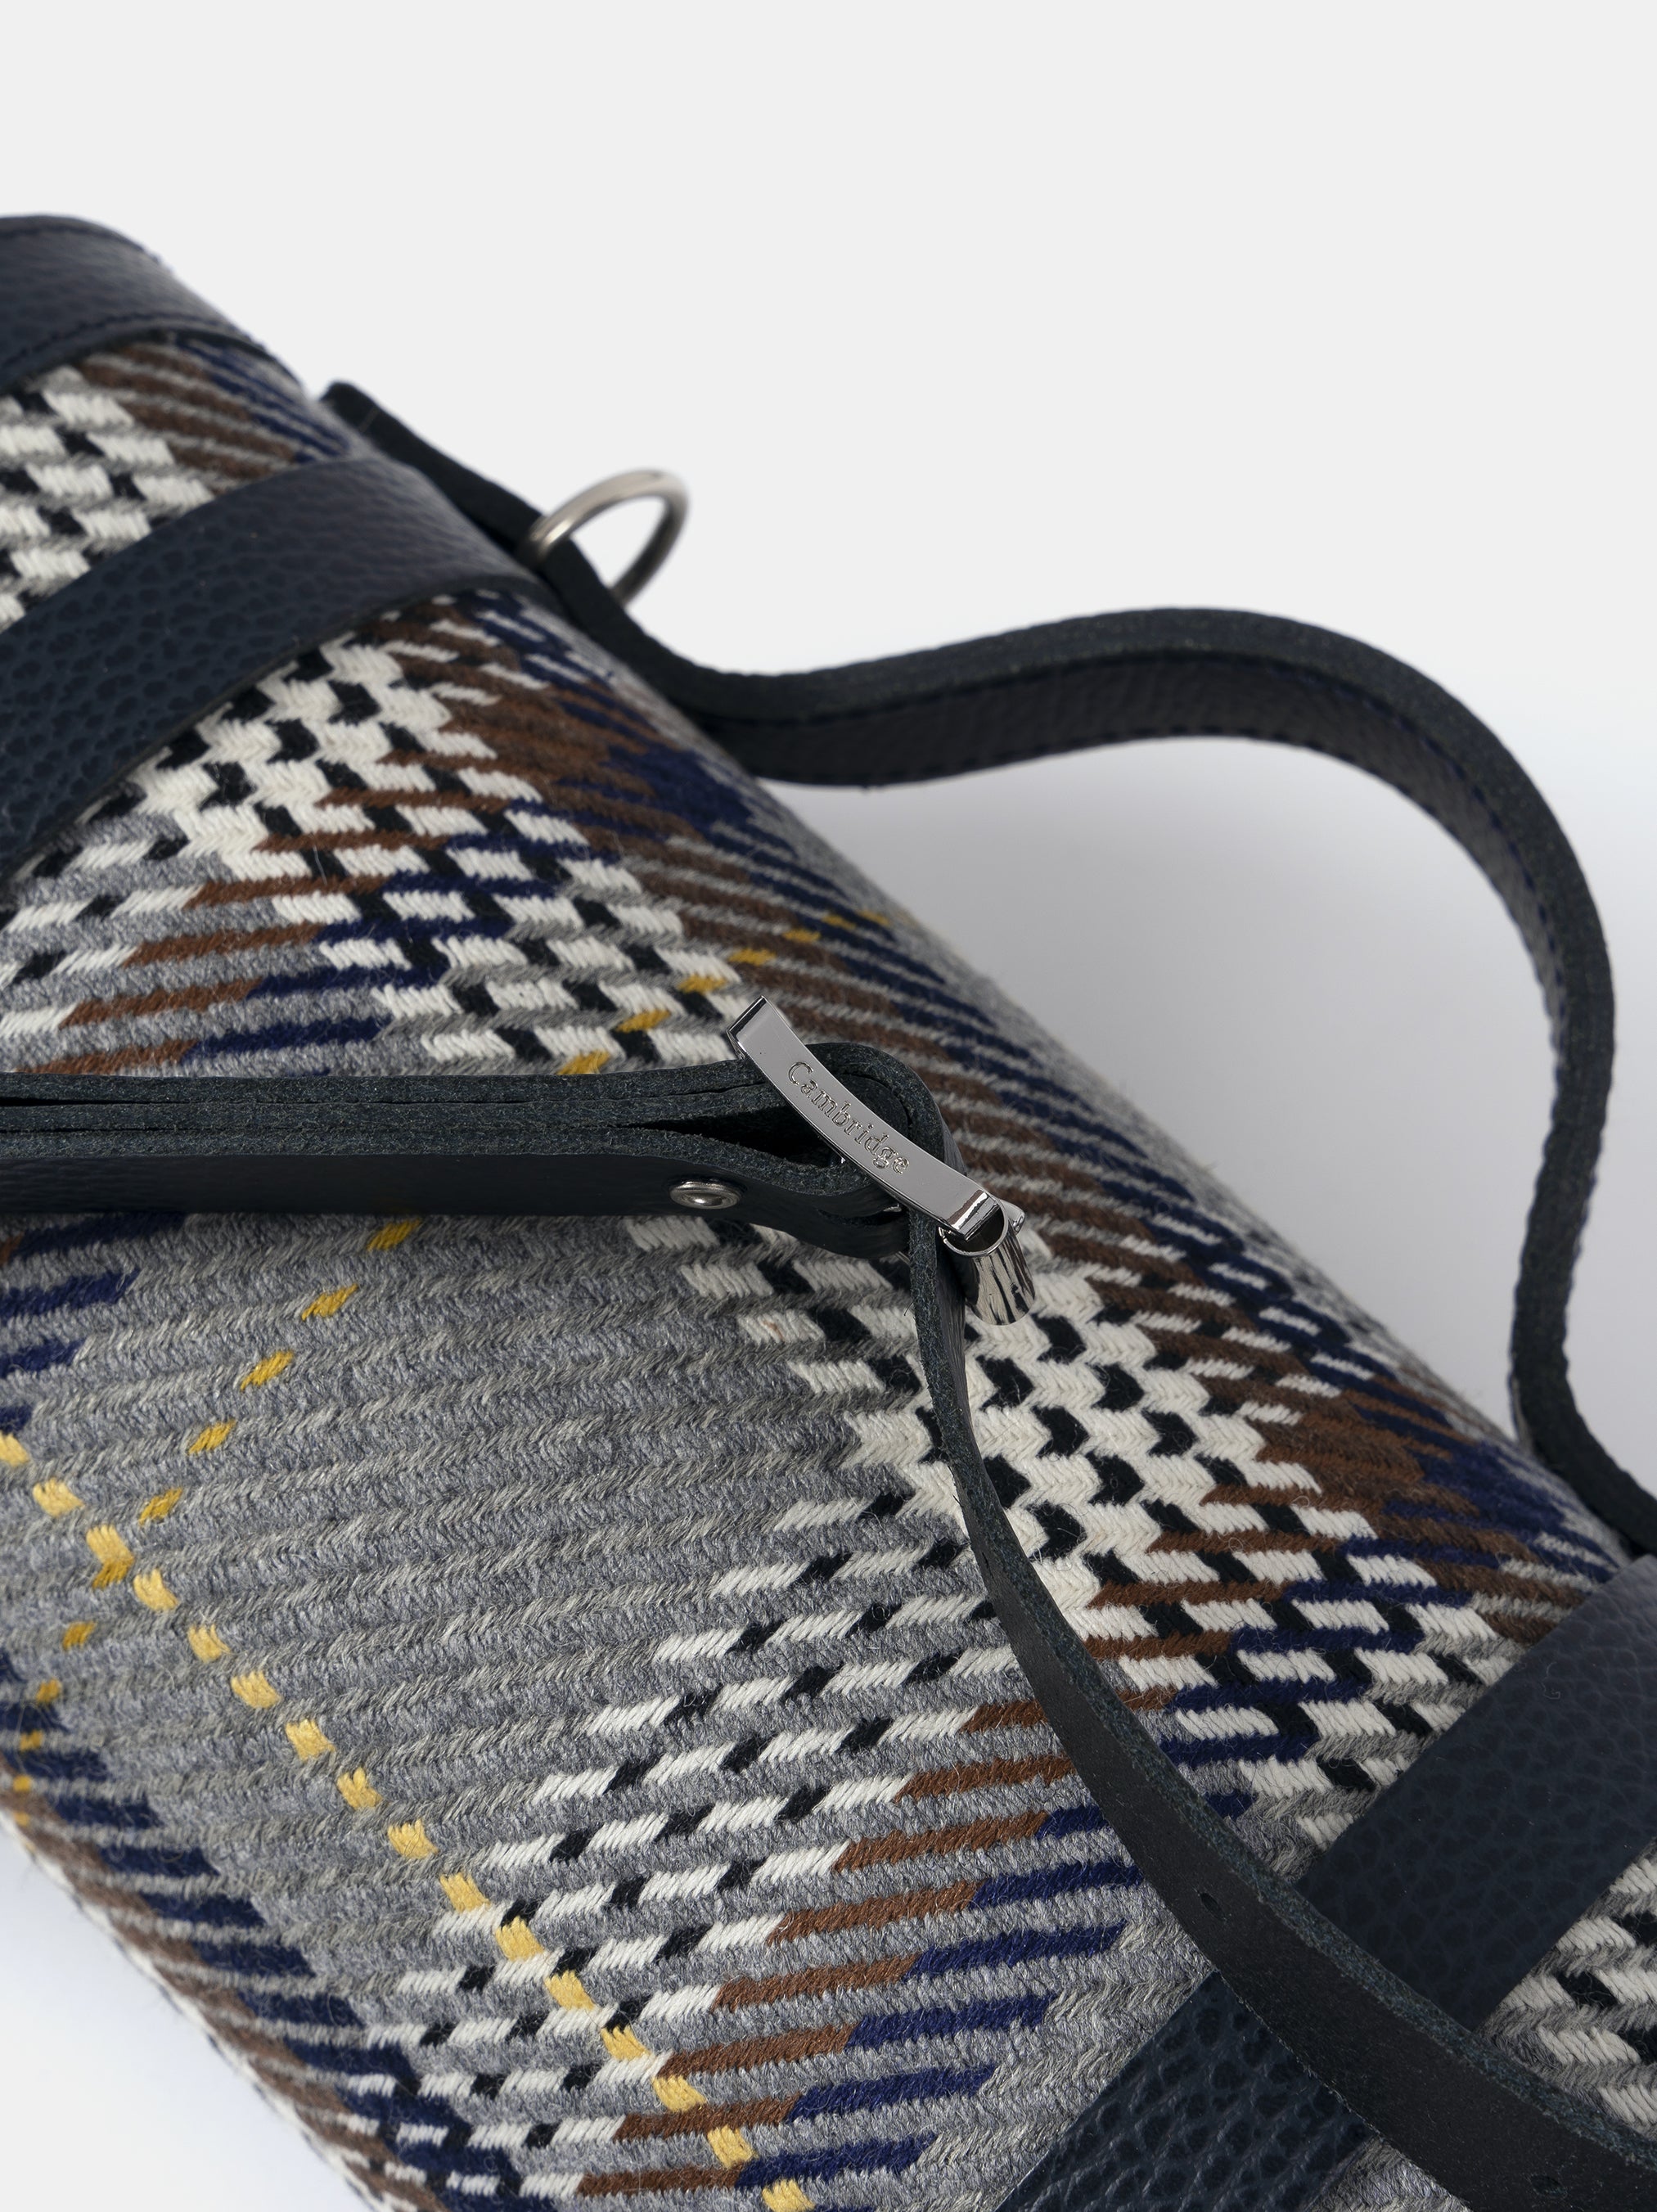 The Bowls Bag - Navy Celtic & Gloverall Grey Check